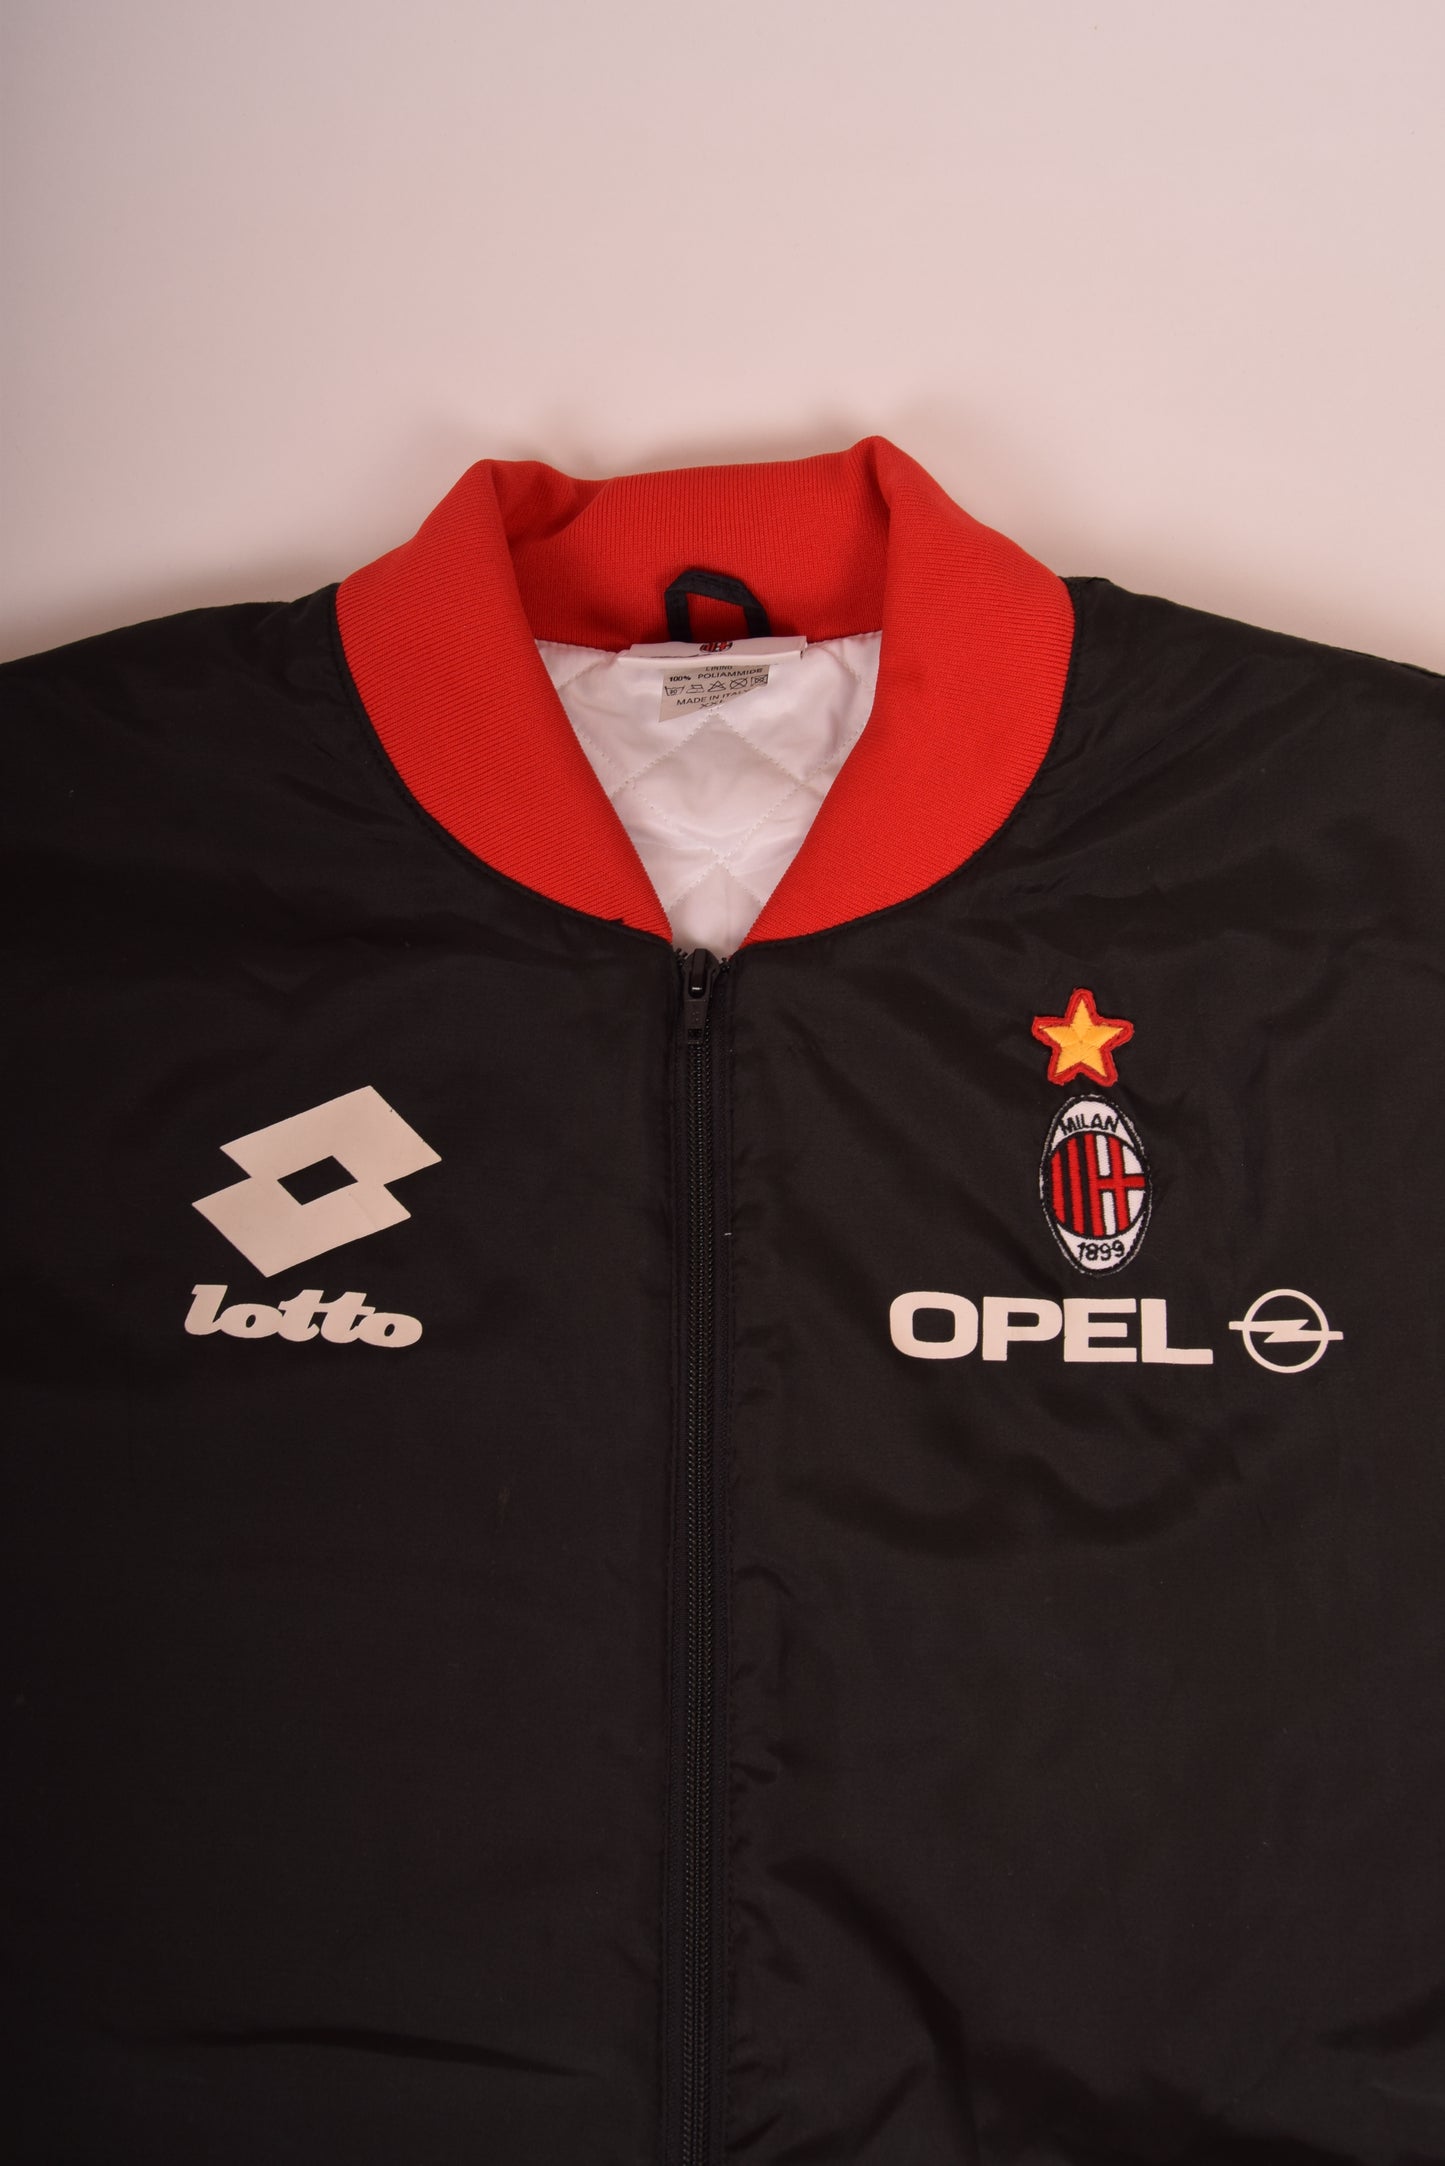 AC Milan Lotto Quilted Jacket 90's Size XXL Made in Italy Opel